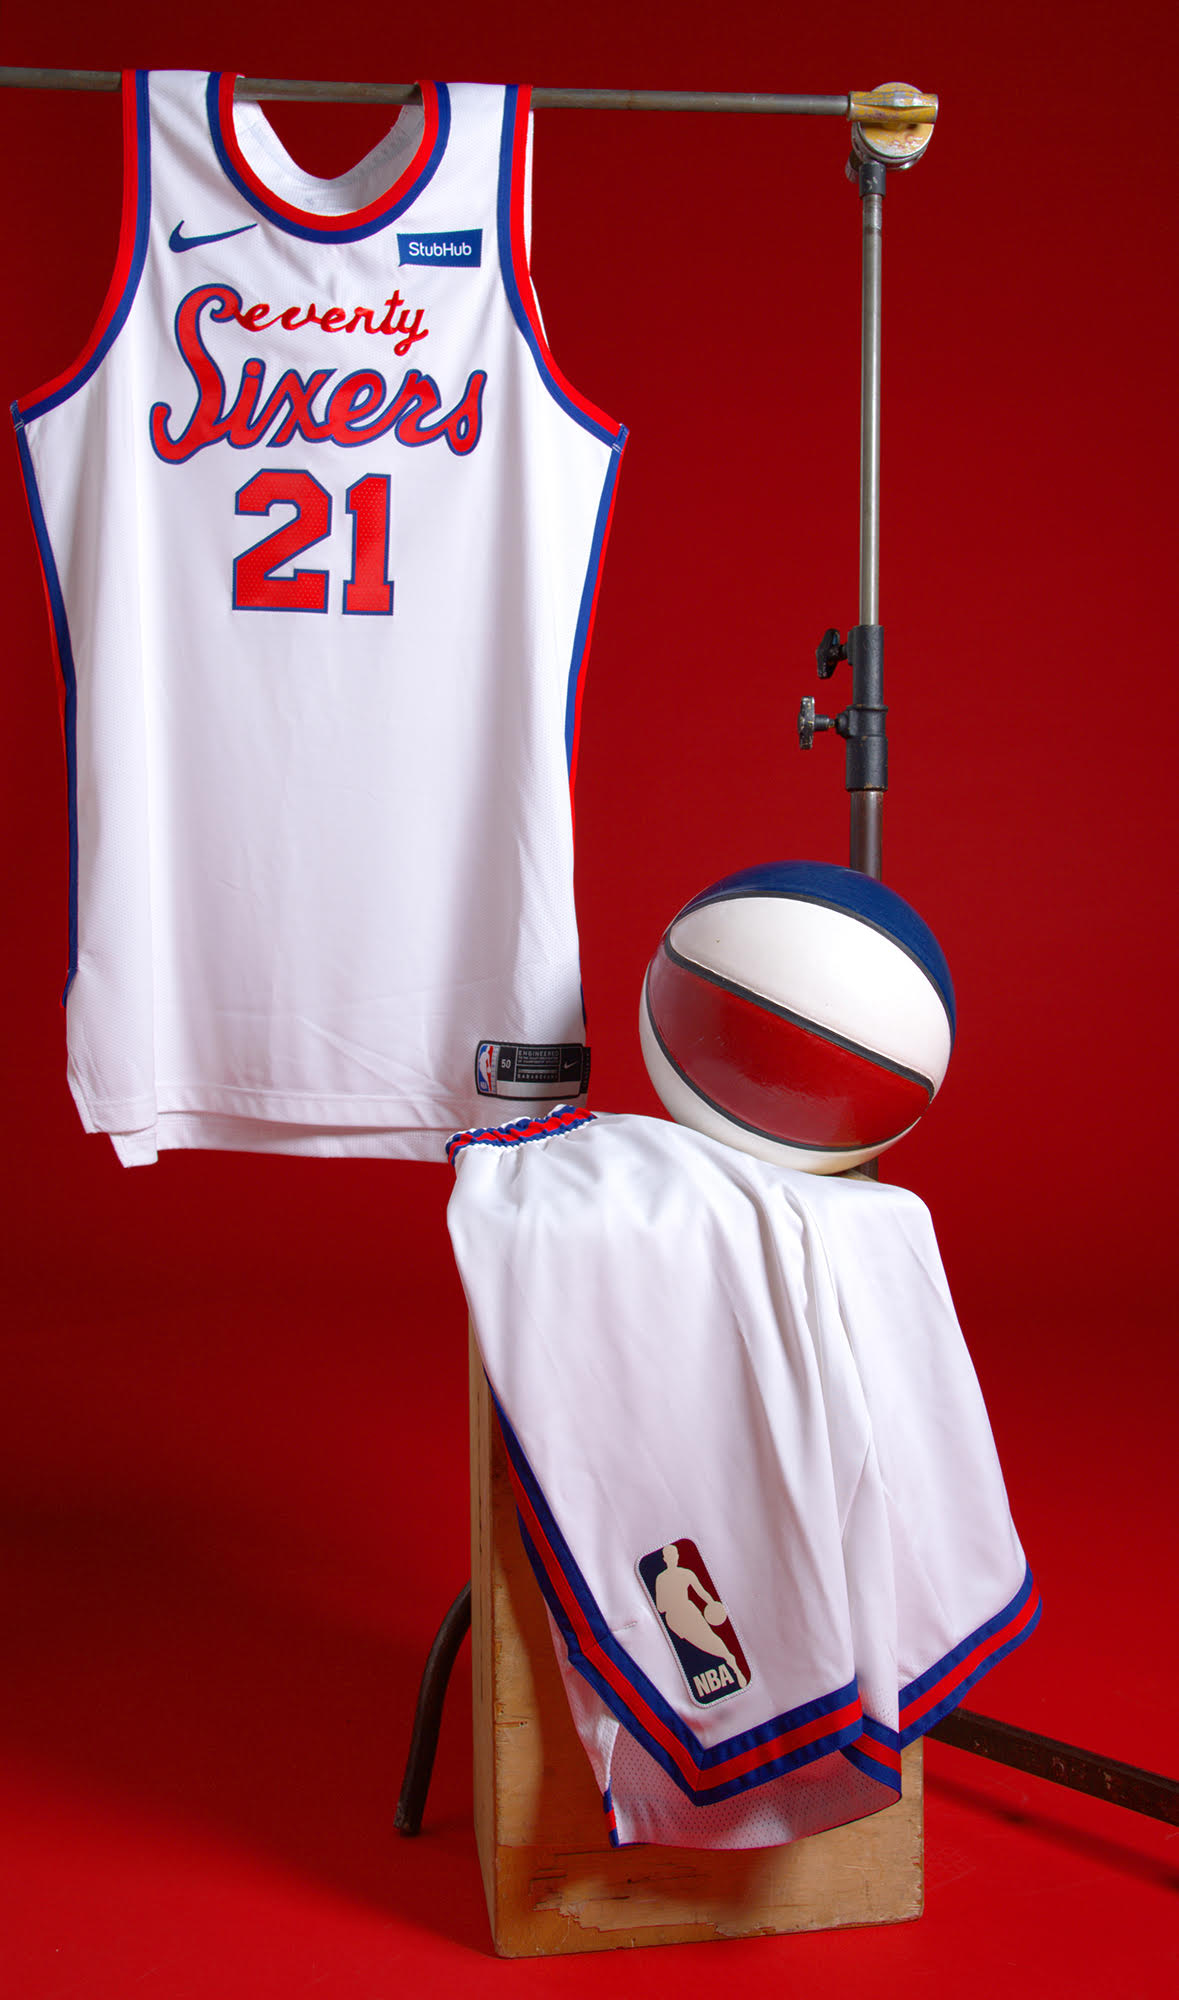 Sixers' newest uniforms a nod to former great Billy Cunningham